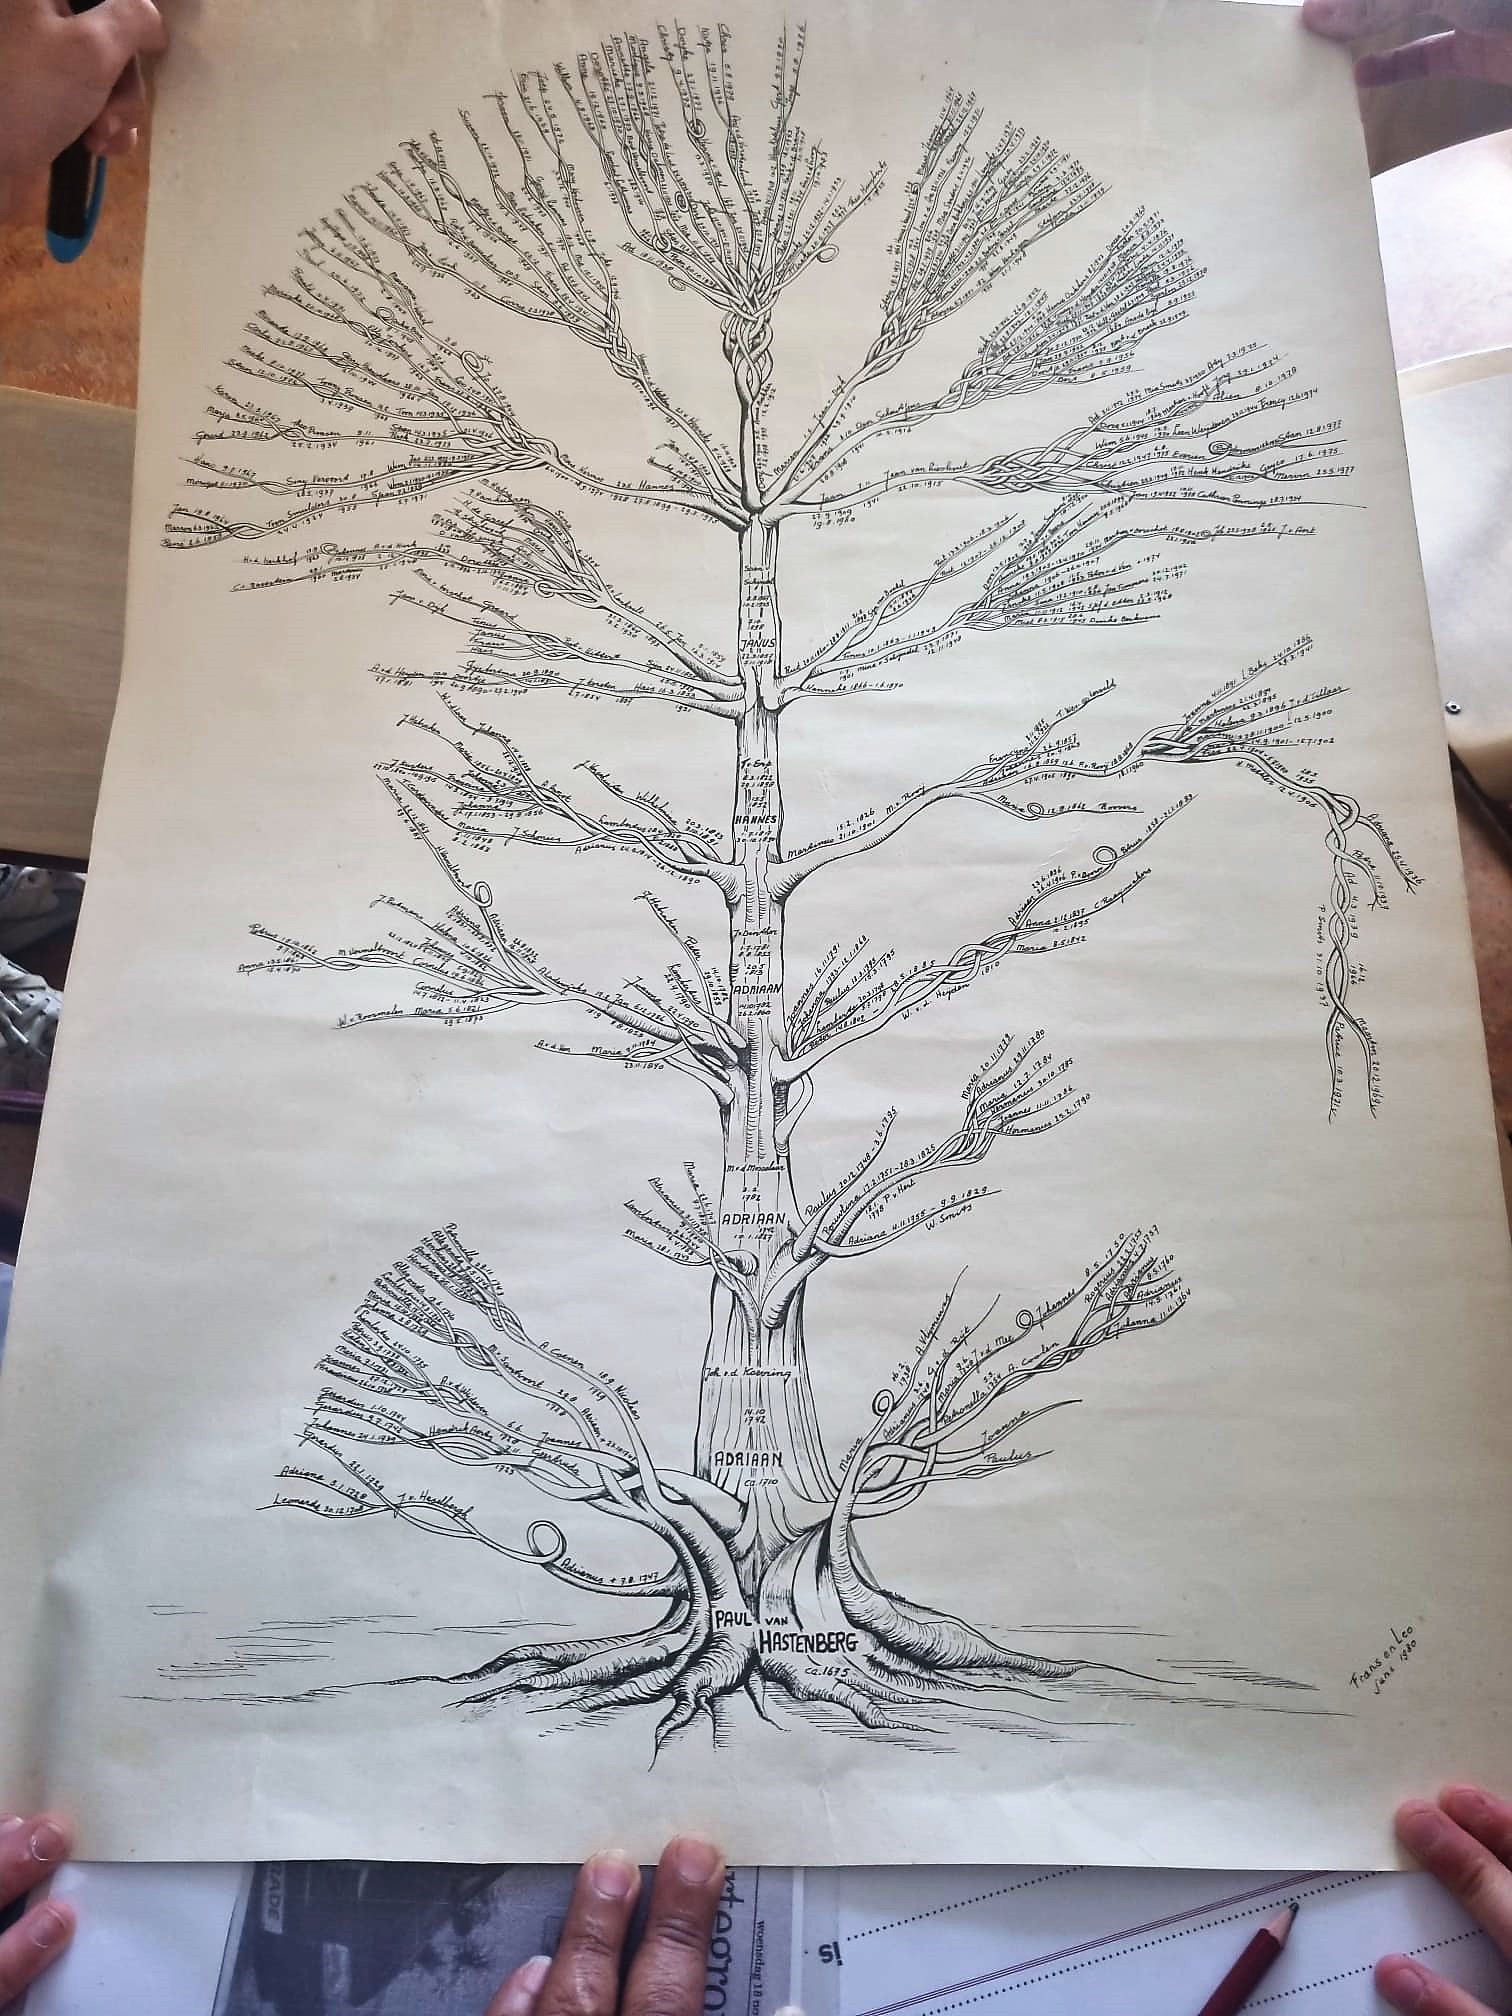 family artefacts - a large family tree